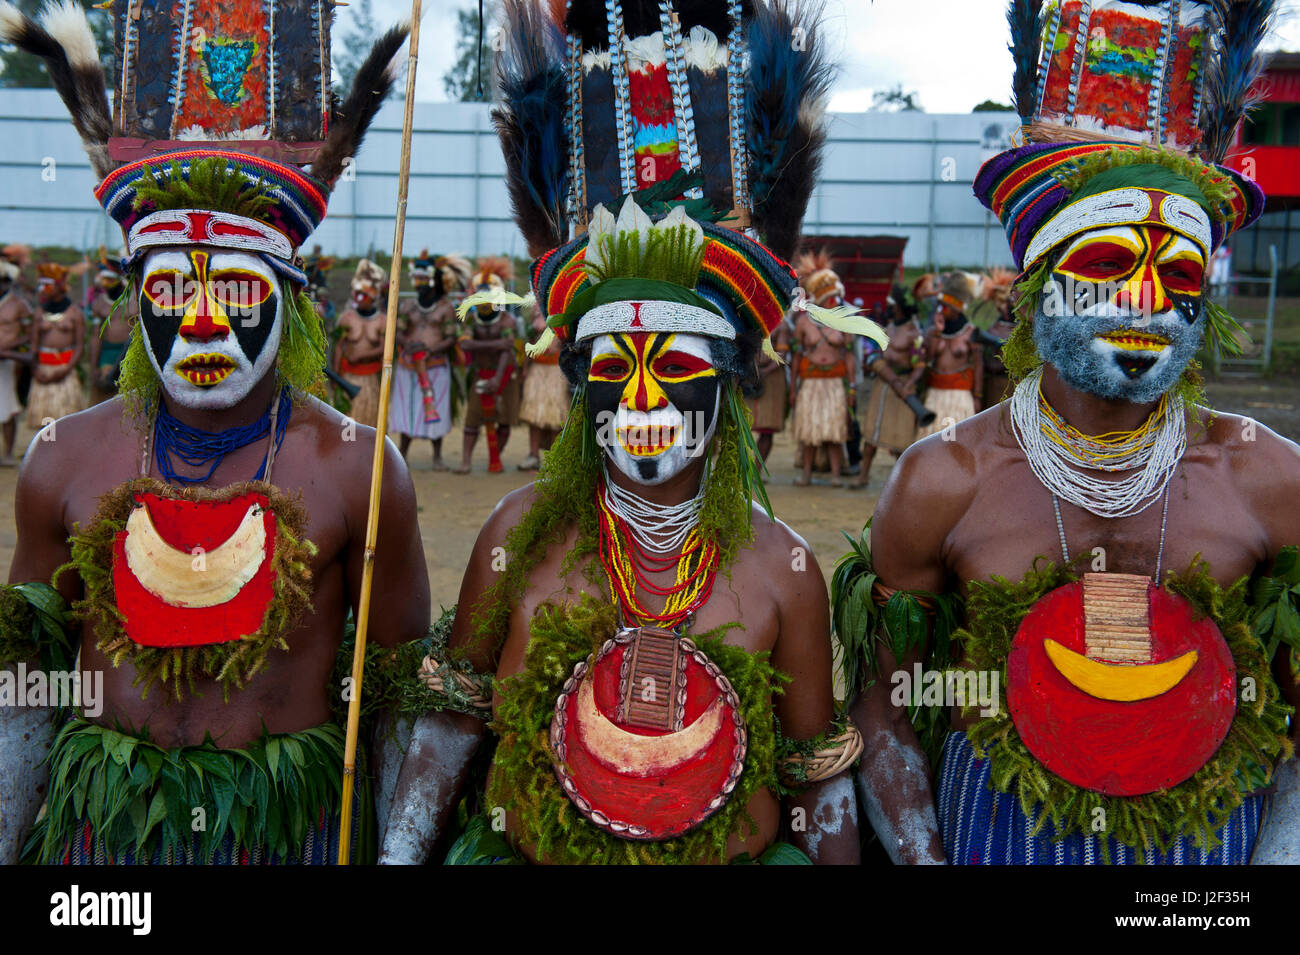 Colorful dress and face painted local tribes celebrating the traditional Sing Sing in Enga in the Highlands of Papua New Guinea, Melanesia Stock Photo